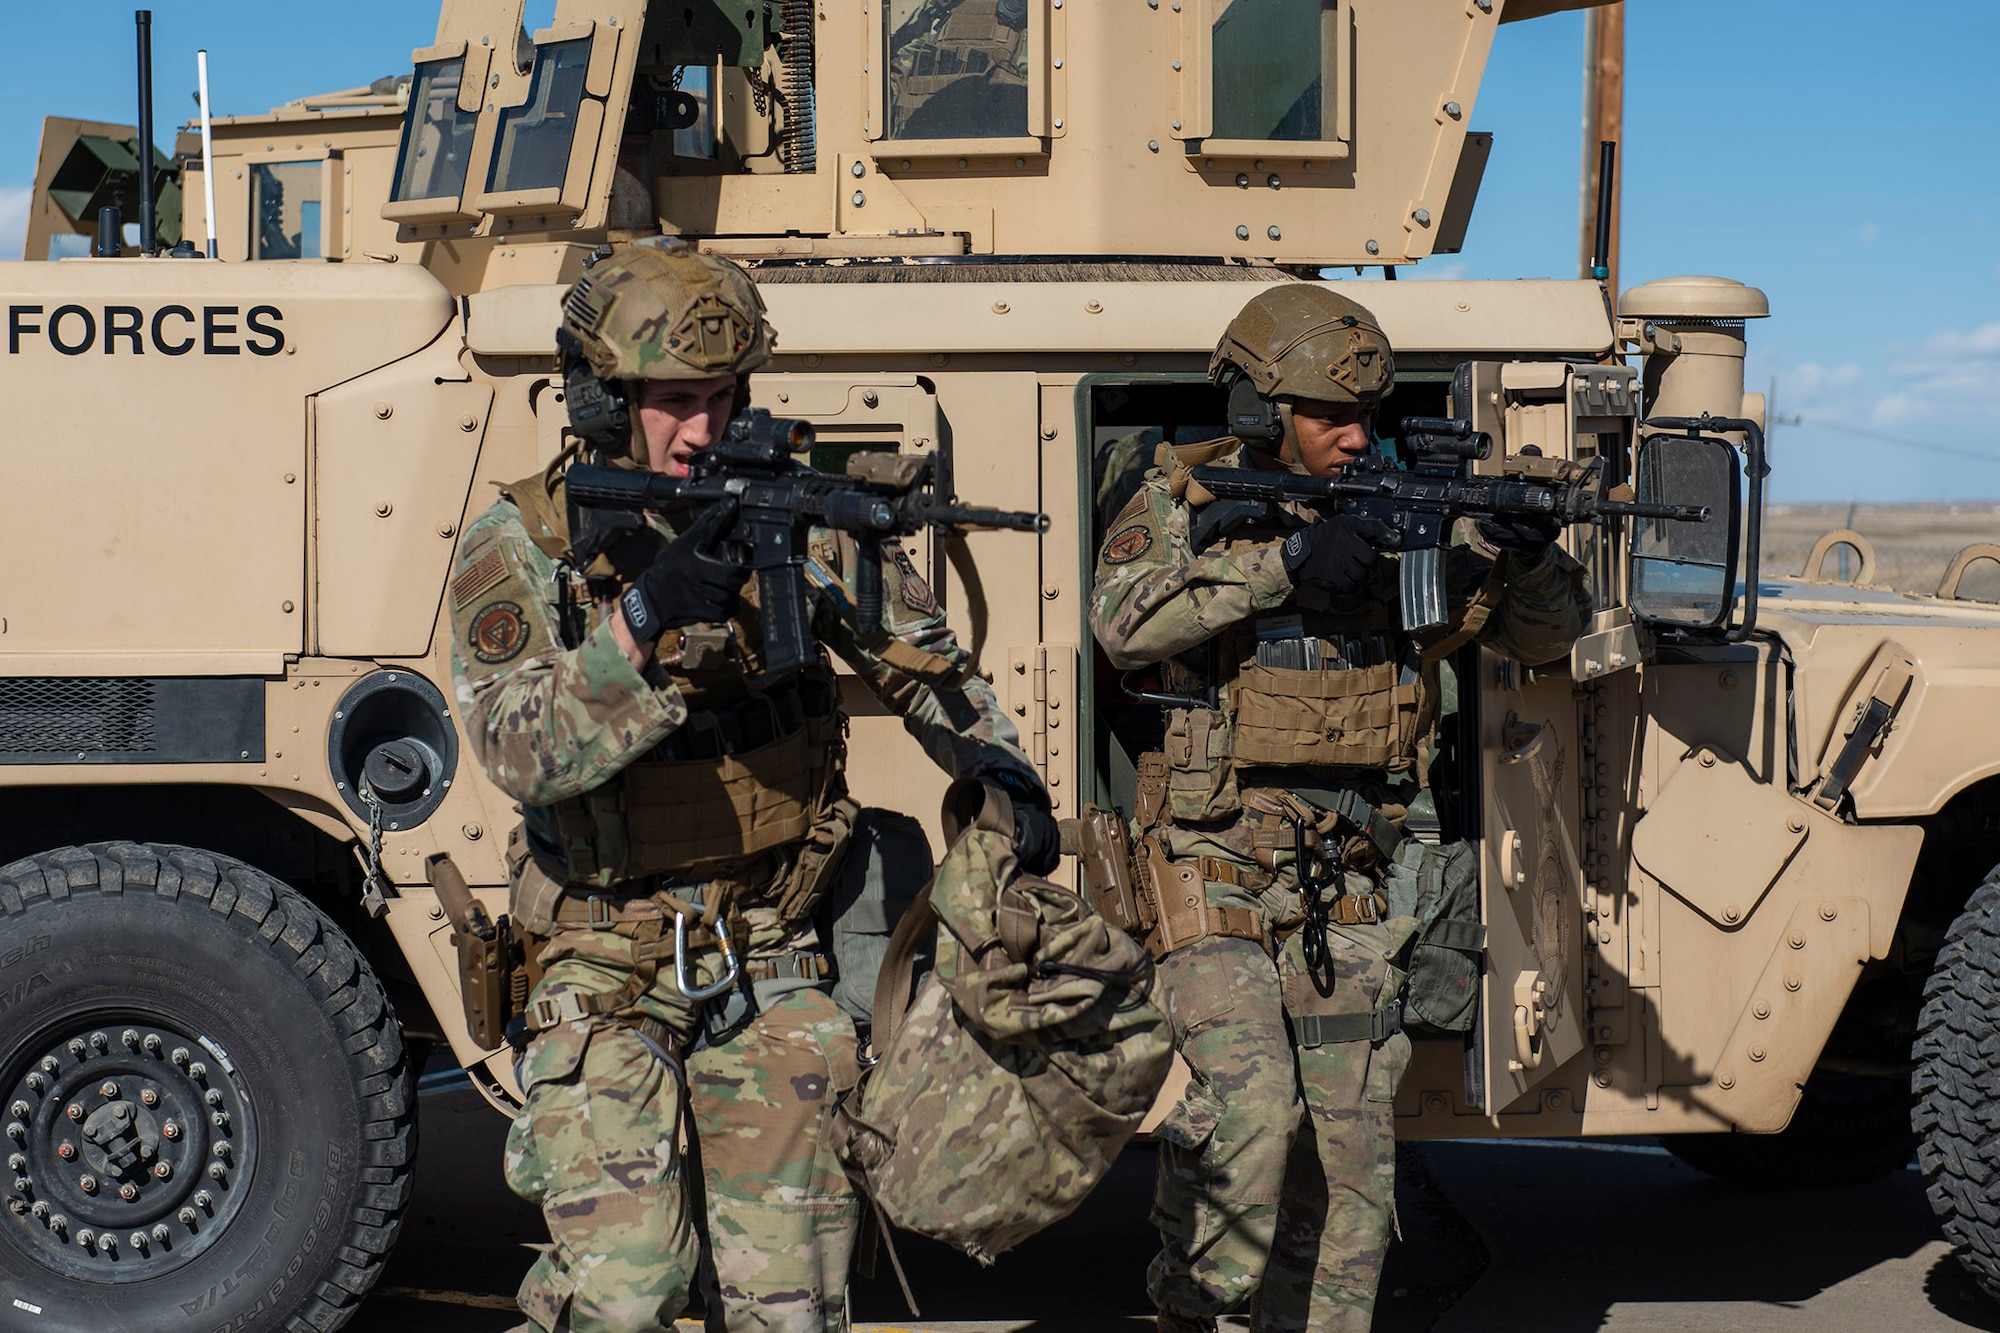 From the left, Airman 1st Class Spencer Riezebos and Senior Airman Jalen Pearson, 341st Missile Security Operation Squadrons tactical response force members, exit a Humvee April 19, 2022, during a training exercise at a launch facility near Malmstrom Air Force Base, Mont. The training exercise tested TRF’s ability to be a lethal and responsive force during emergency situations in the missile field. (U.S. Air Force photo by Airman 1st Class Elijah Van Zandt)